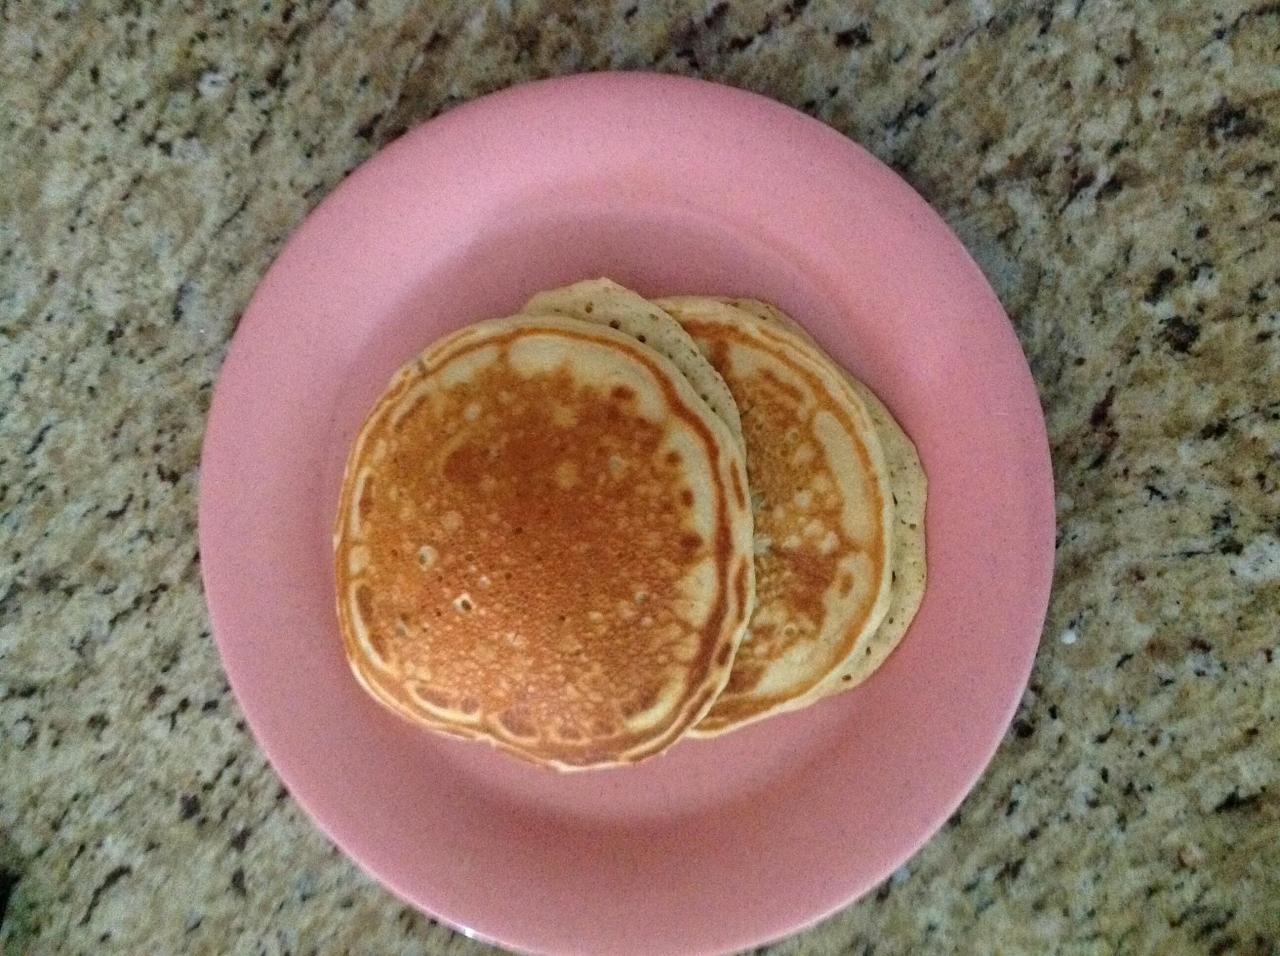 Easy Pancake Recipe Without Baking Powder And Vanilla Extract